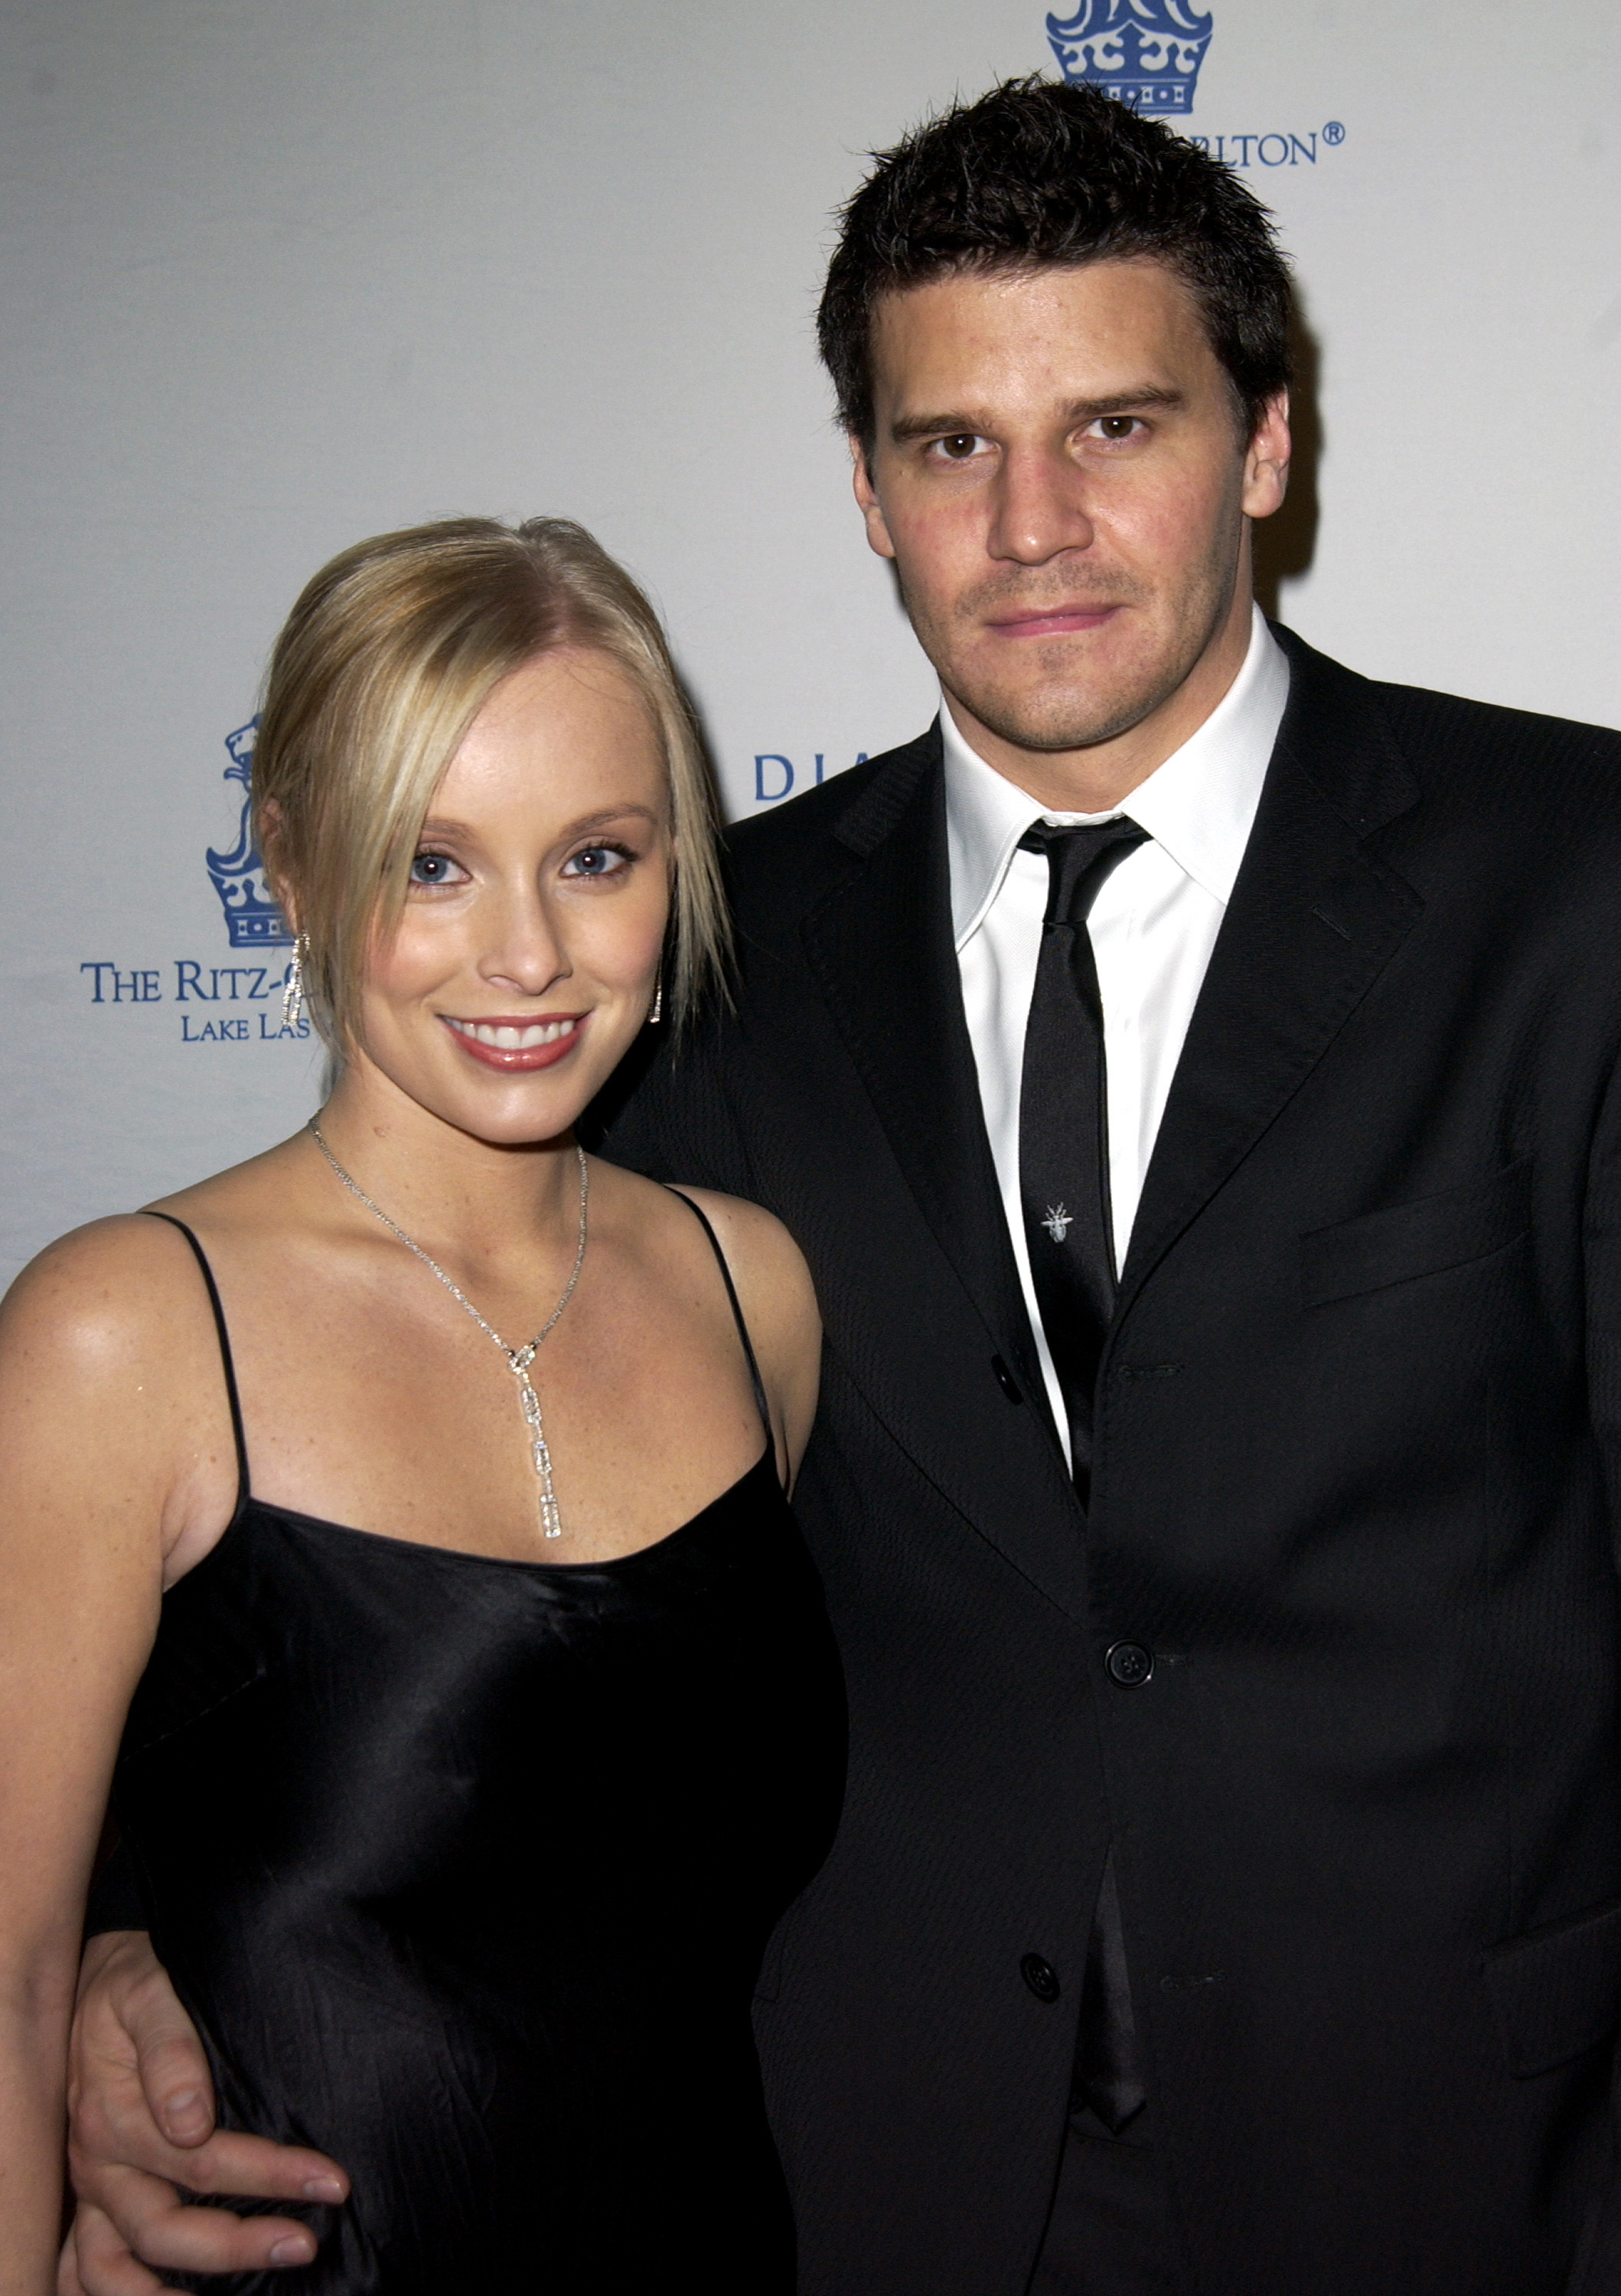 David Boreanaz and Jaime Bergman during "Diamonds and the Power of Love" Exhibit Opening at the New Ritz Carlton Lake Las Vegas Hotel at Ritz Carlton Lake Las Vegas in Lake Las Vegas, Nevada on February 15, 2003 | Source: Getty Images